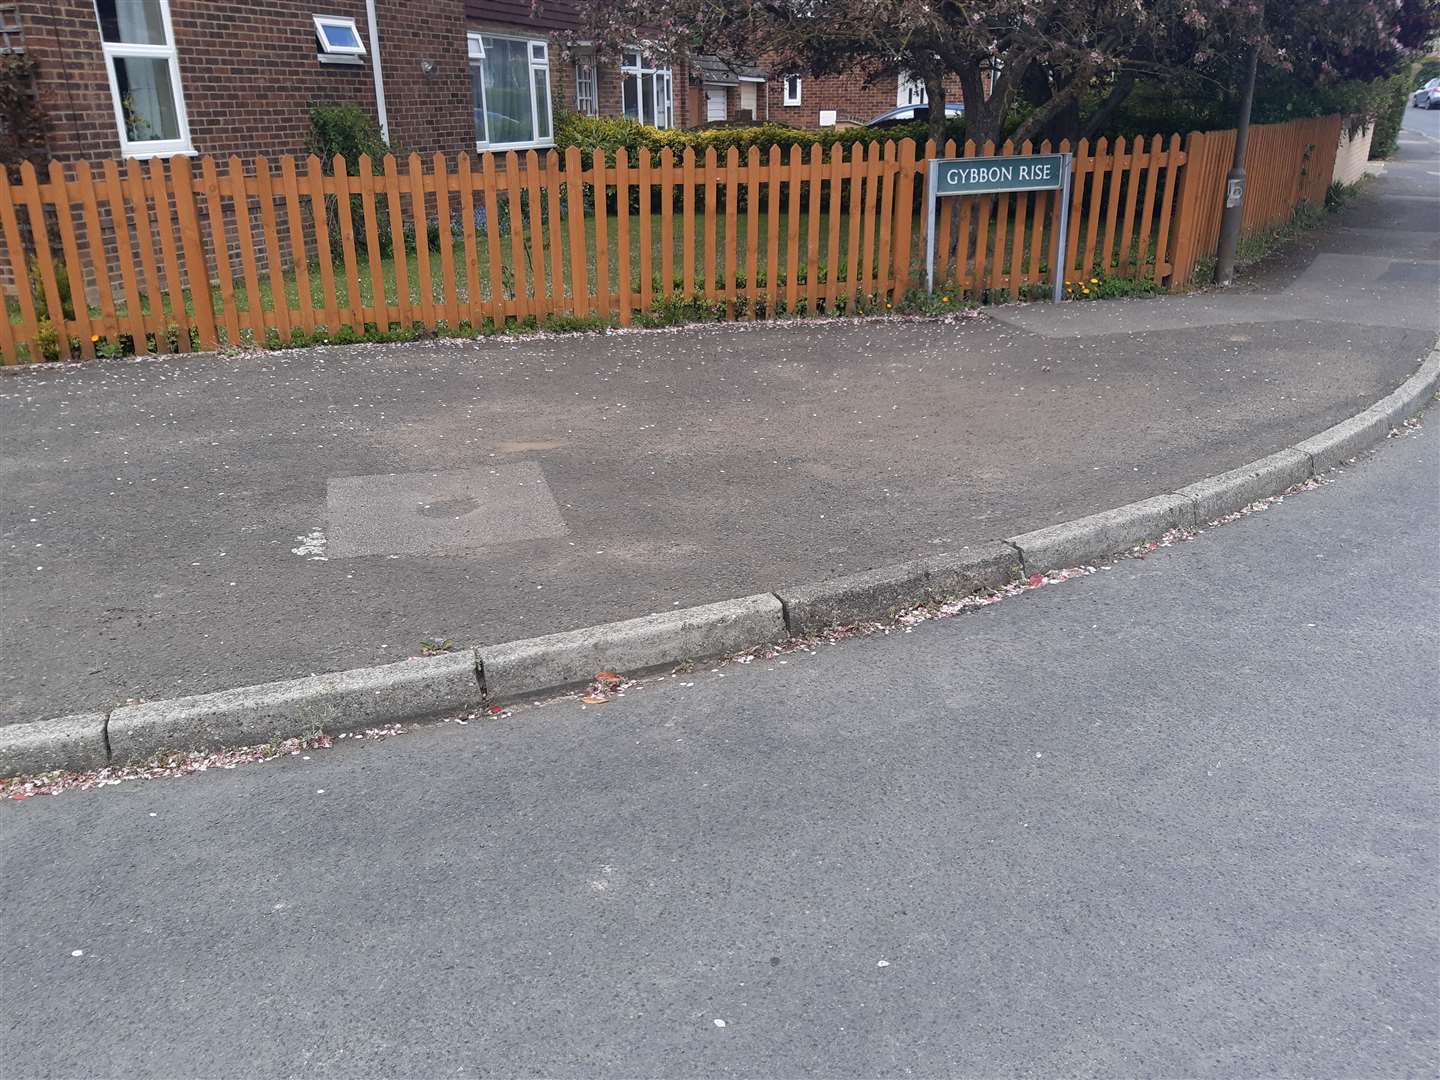 One of the many junctions without a dropped kerb